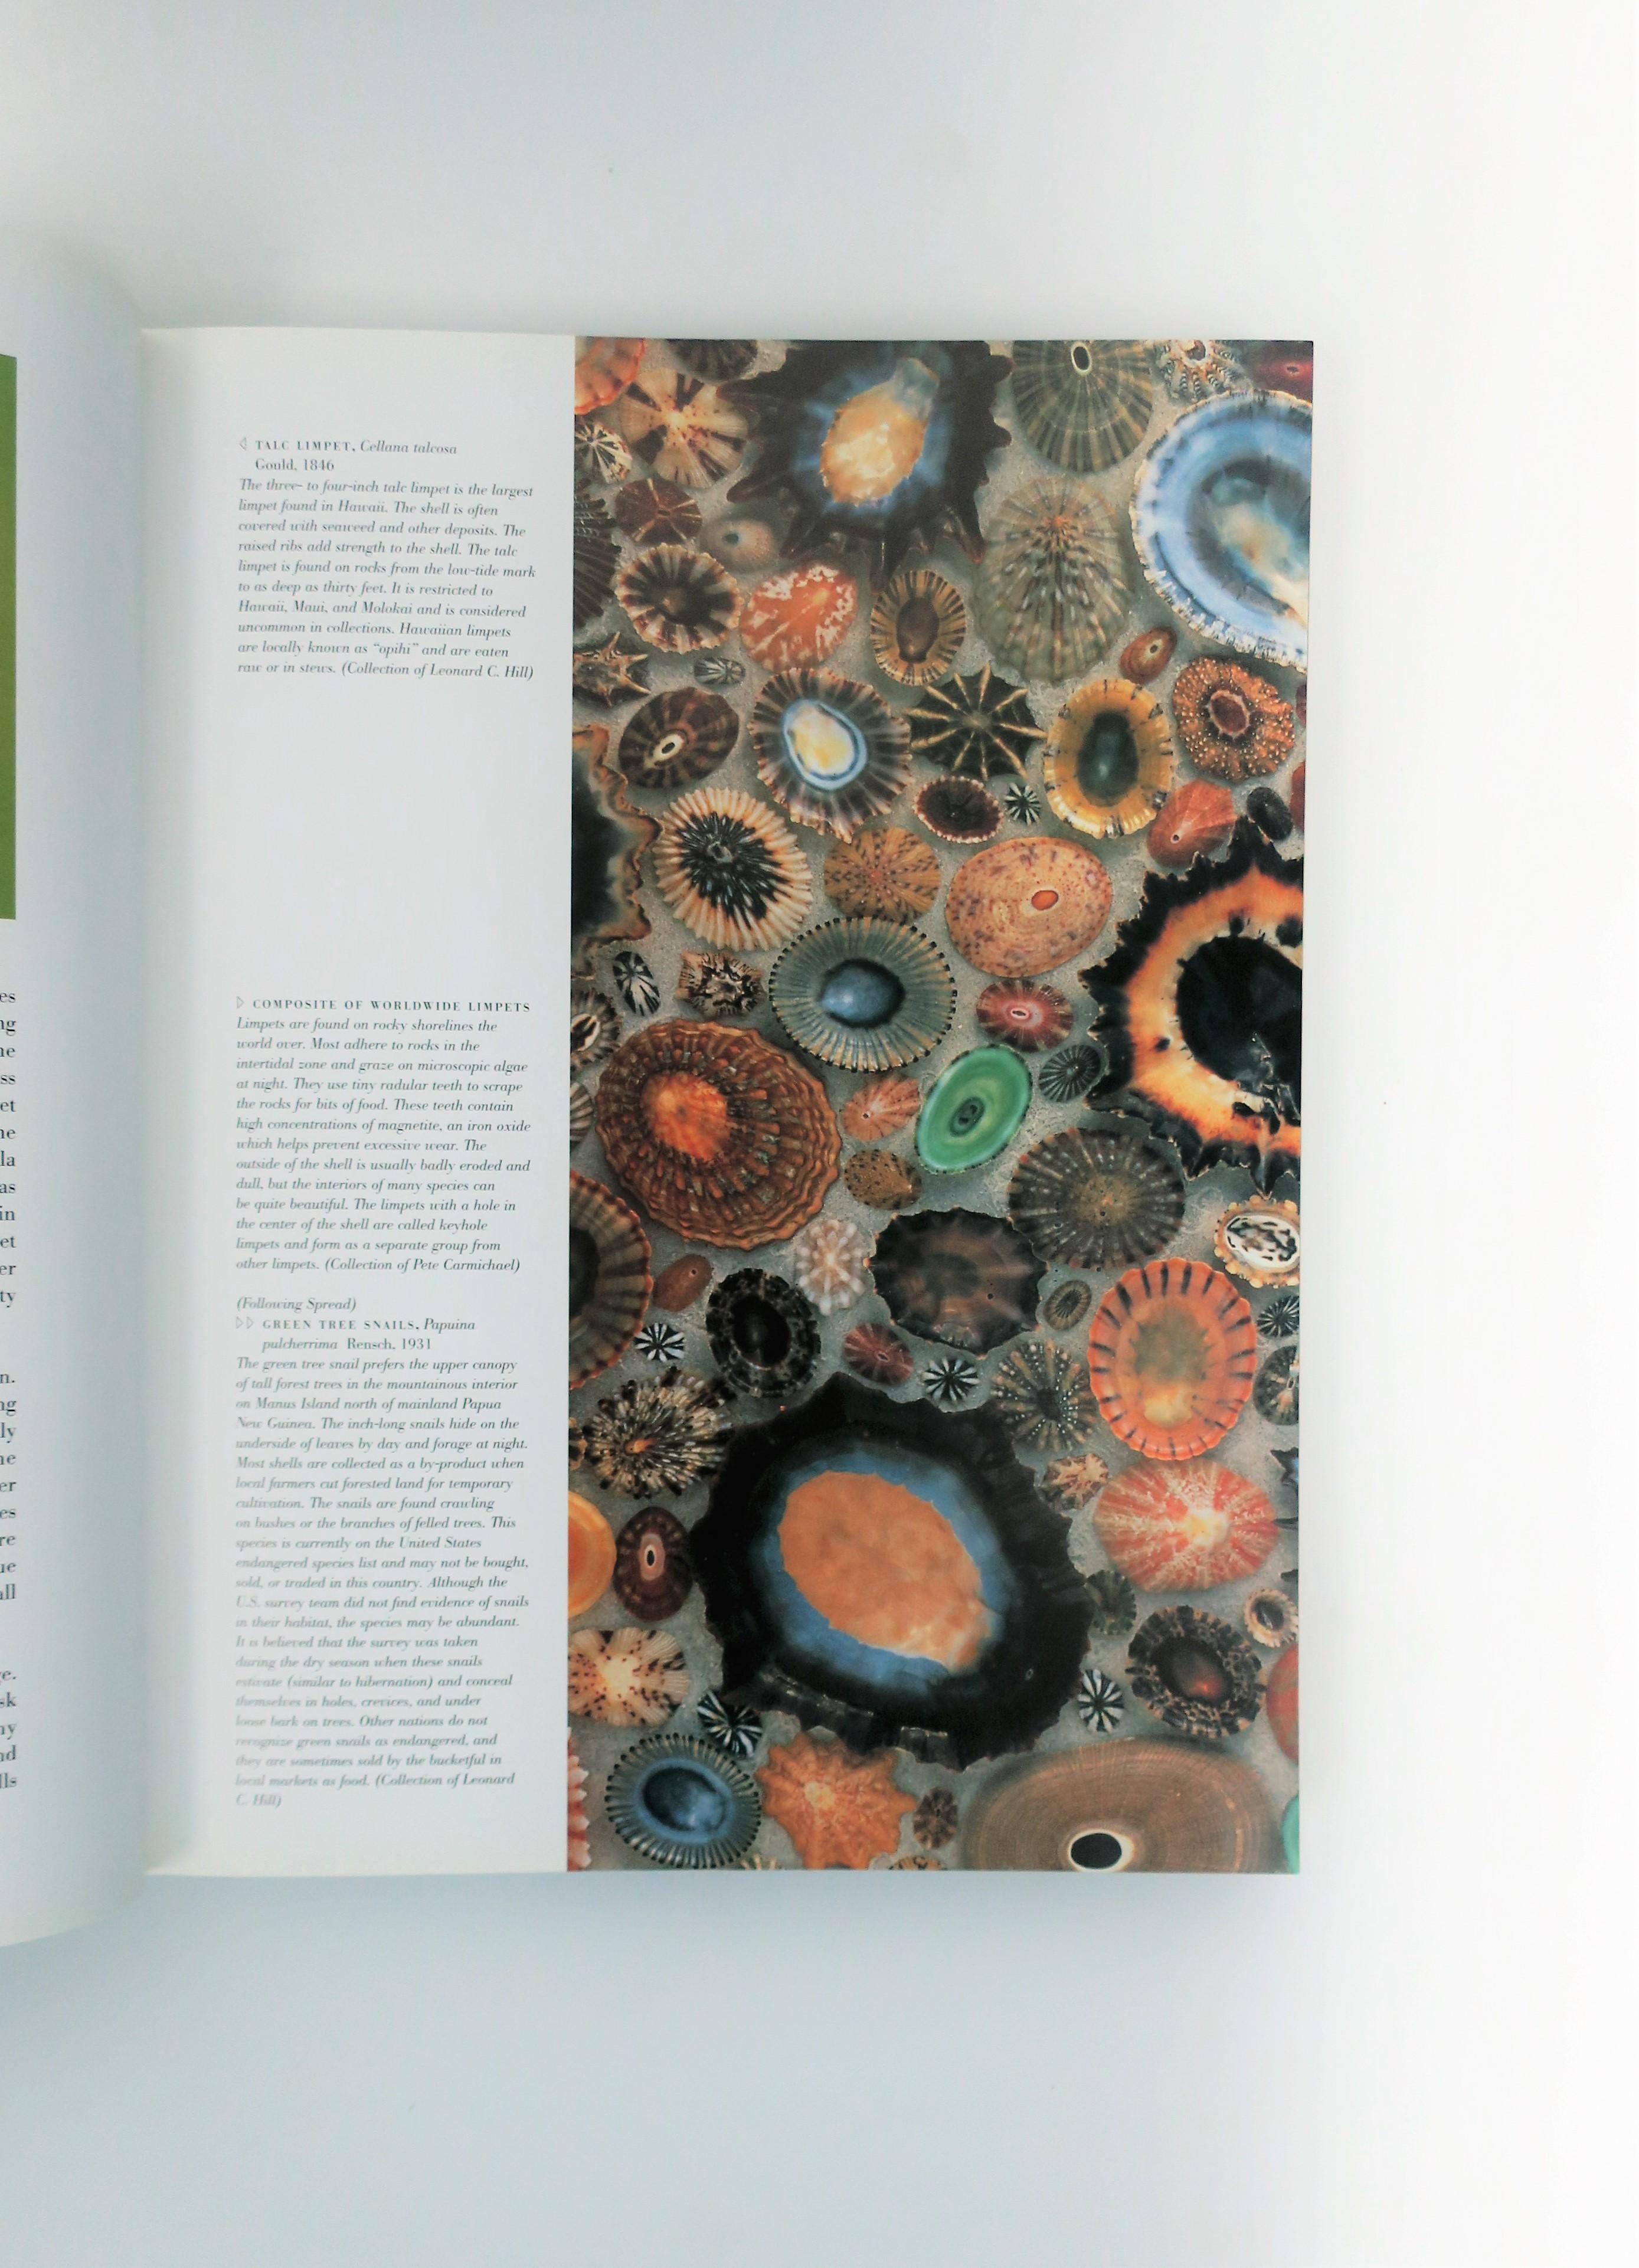 Shells 'Treasures of the Sea' Sea Shell Library or Coffee Table Book, ca. 1990s 1